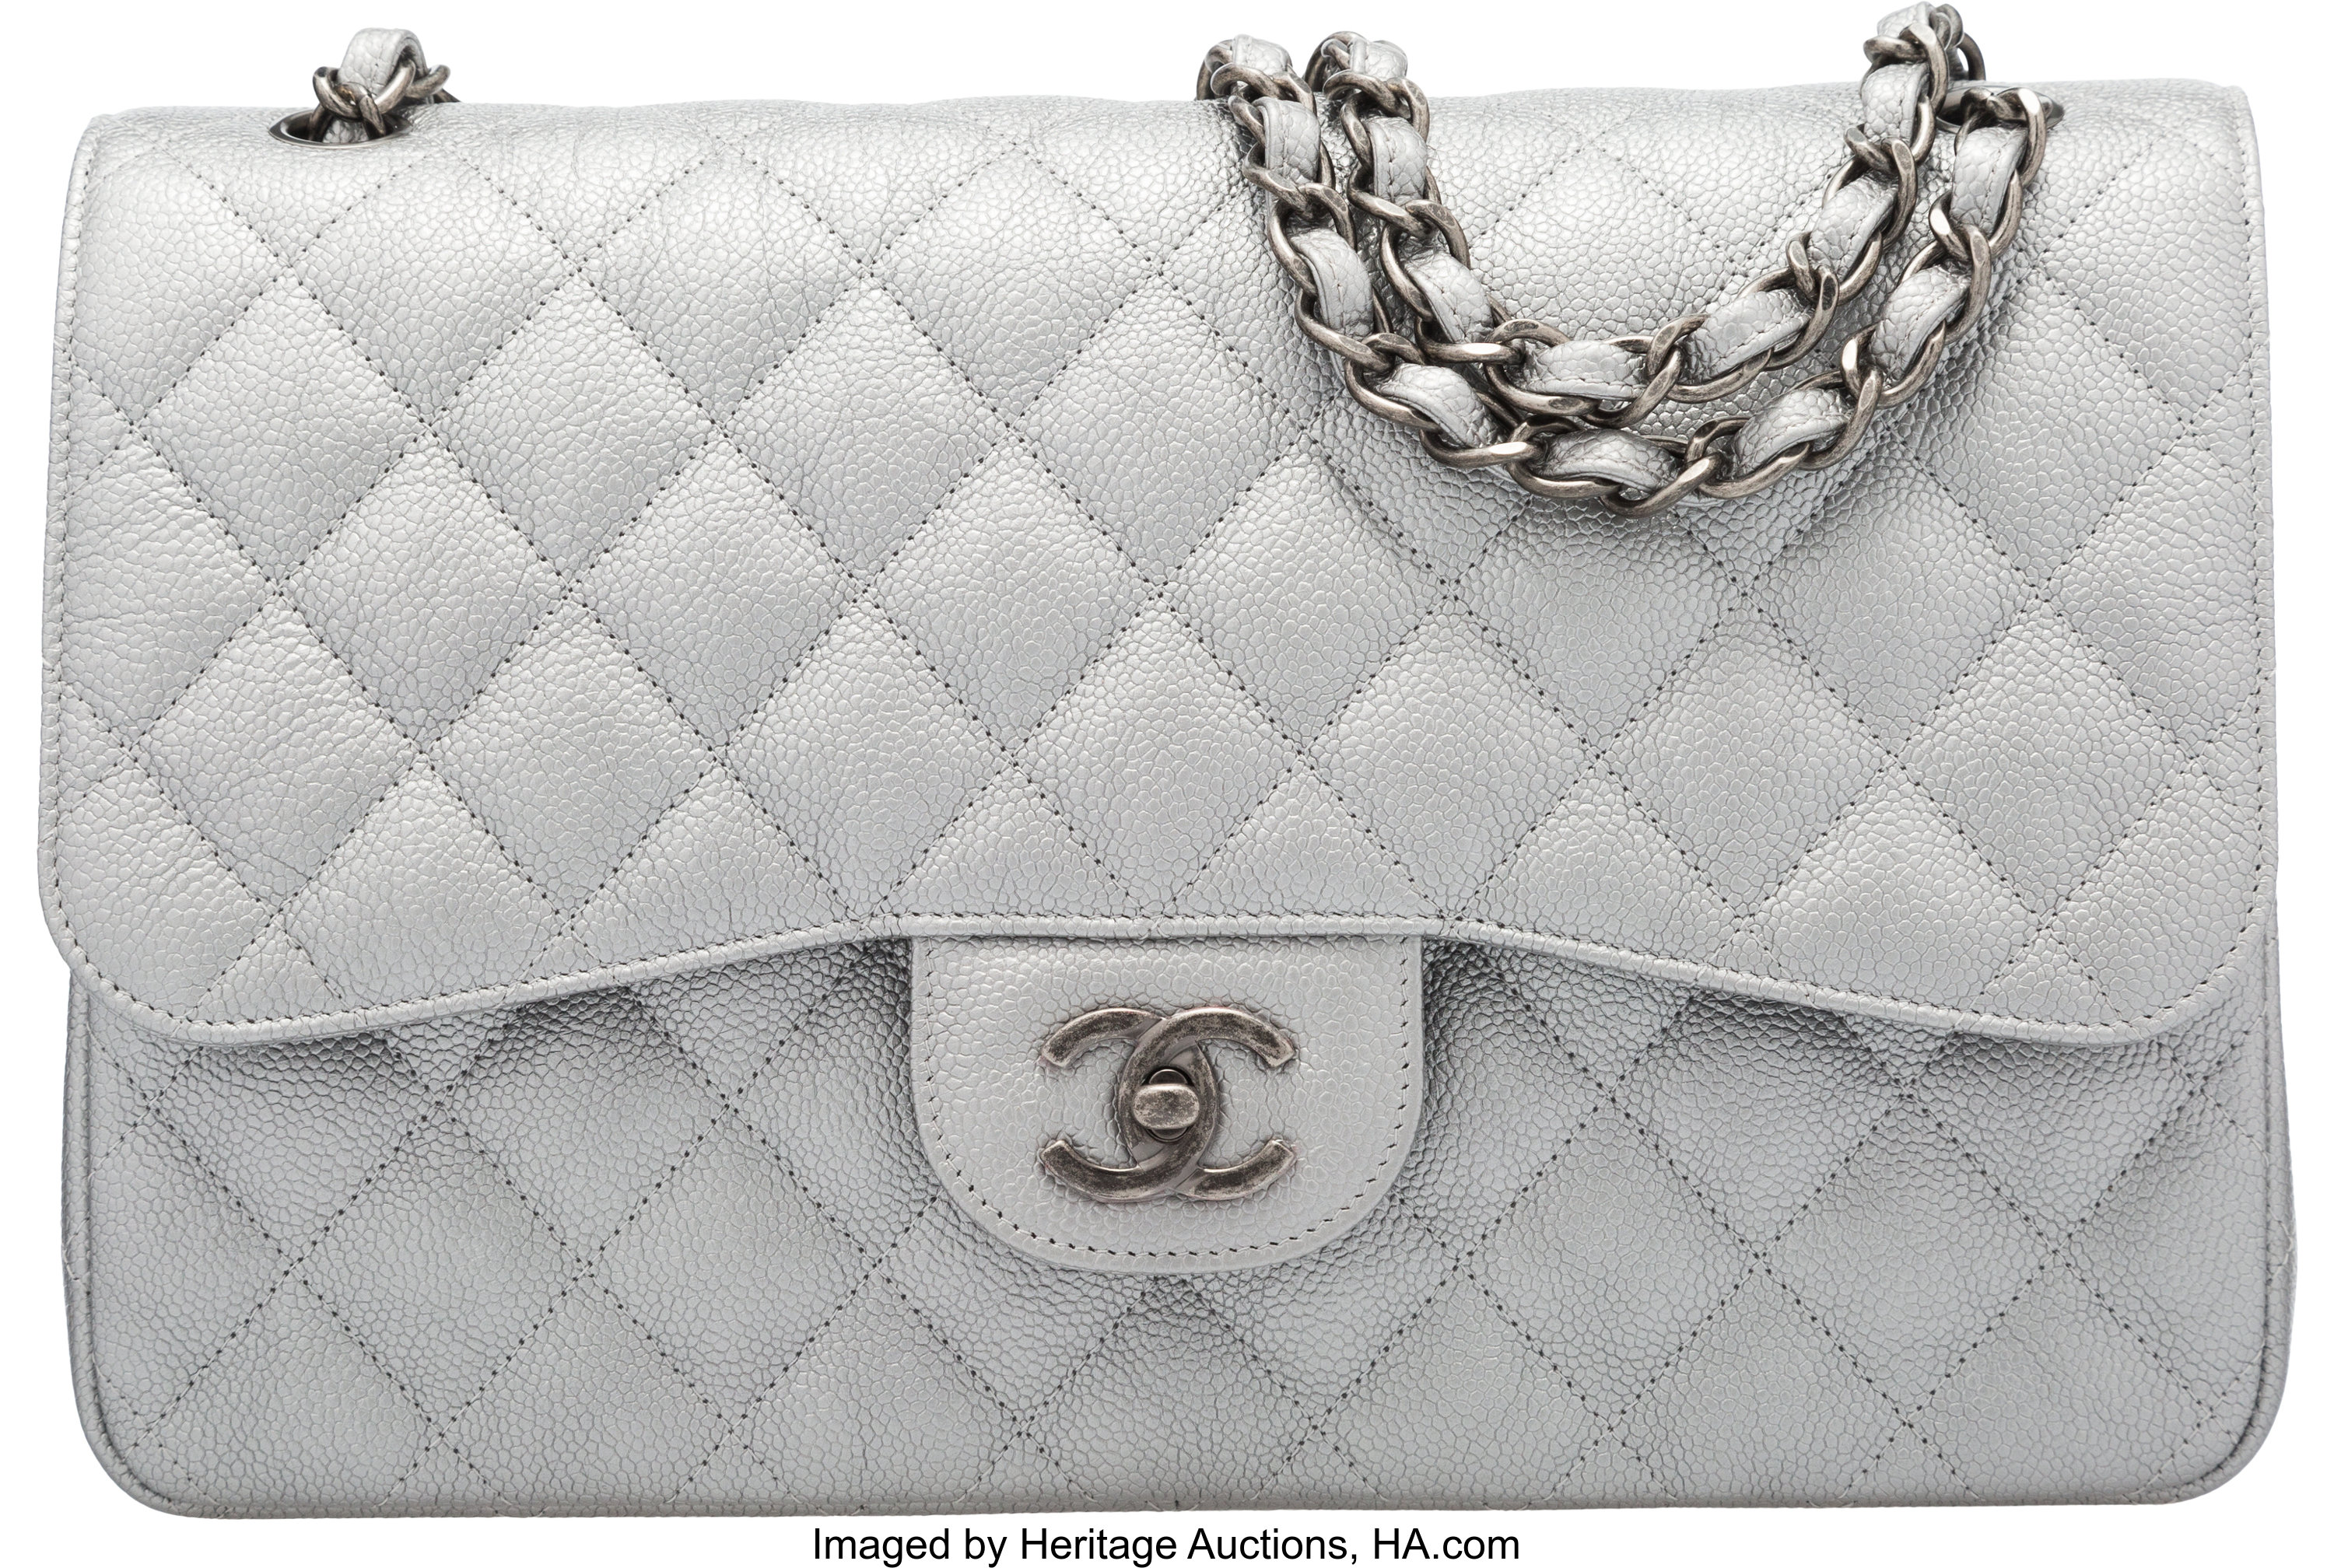 Buy Exclusive Metallic Silver Chanel Classic Flap at REDELUXE - Luxurious Pre-owned Handbags on Sale!